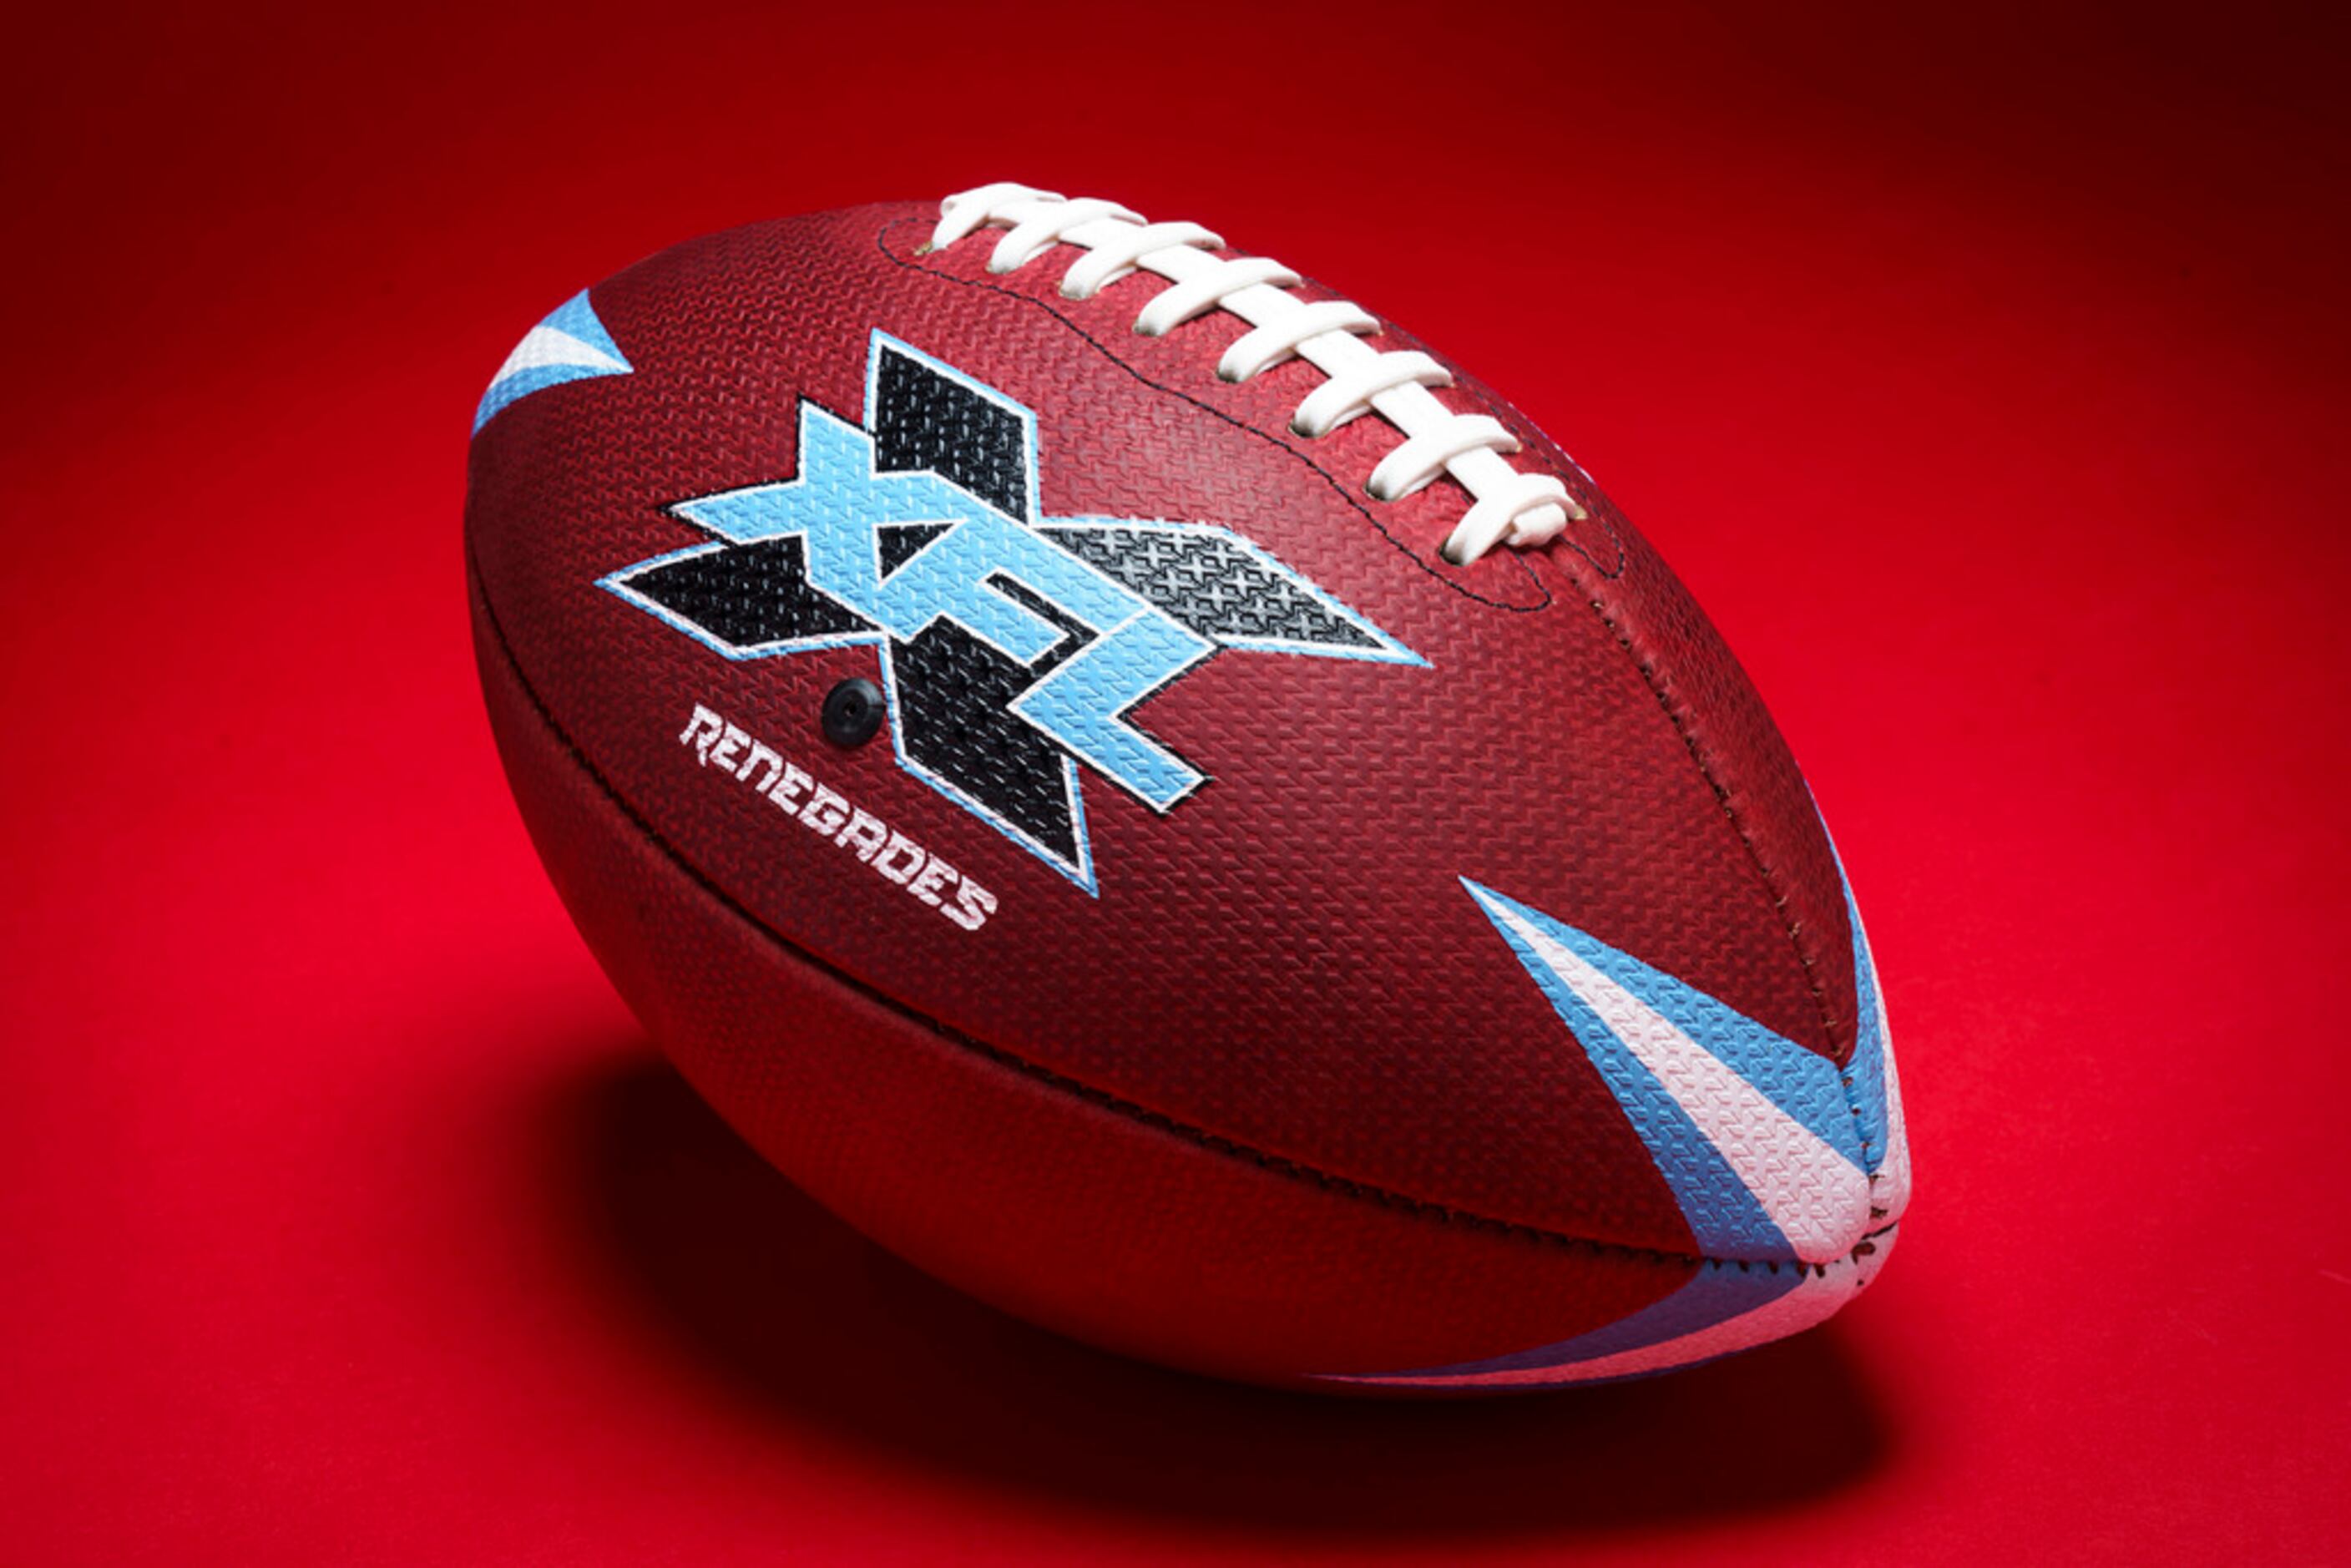 It's February, and it's time for football. XFL football, that is.